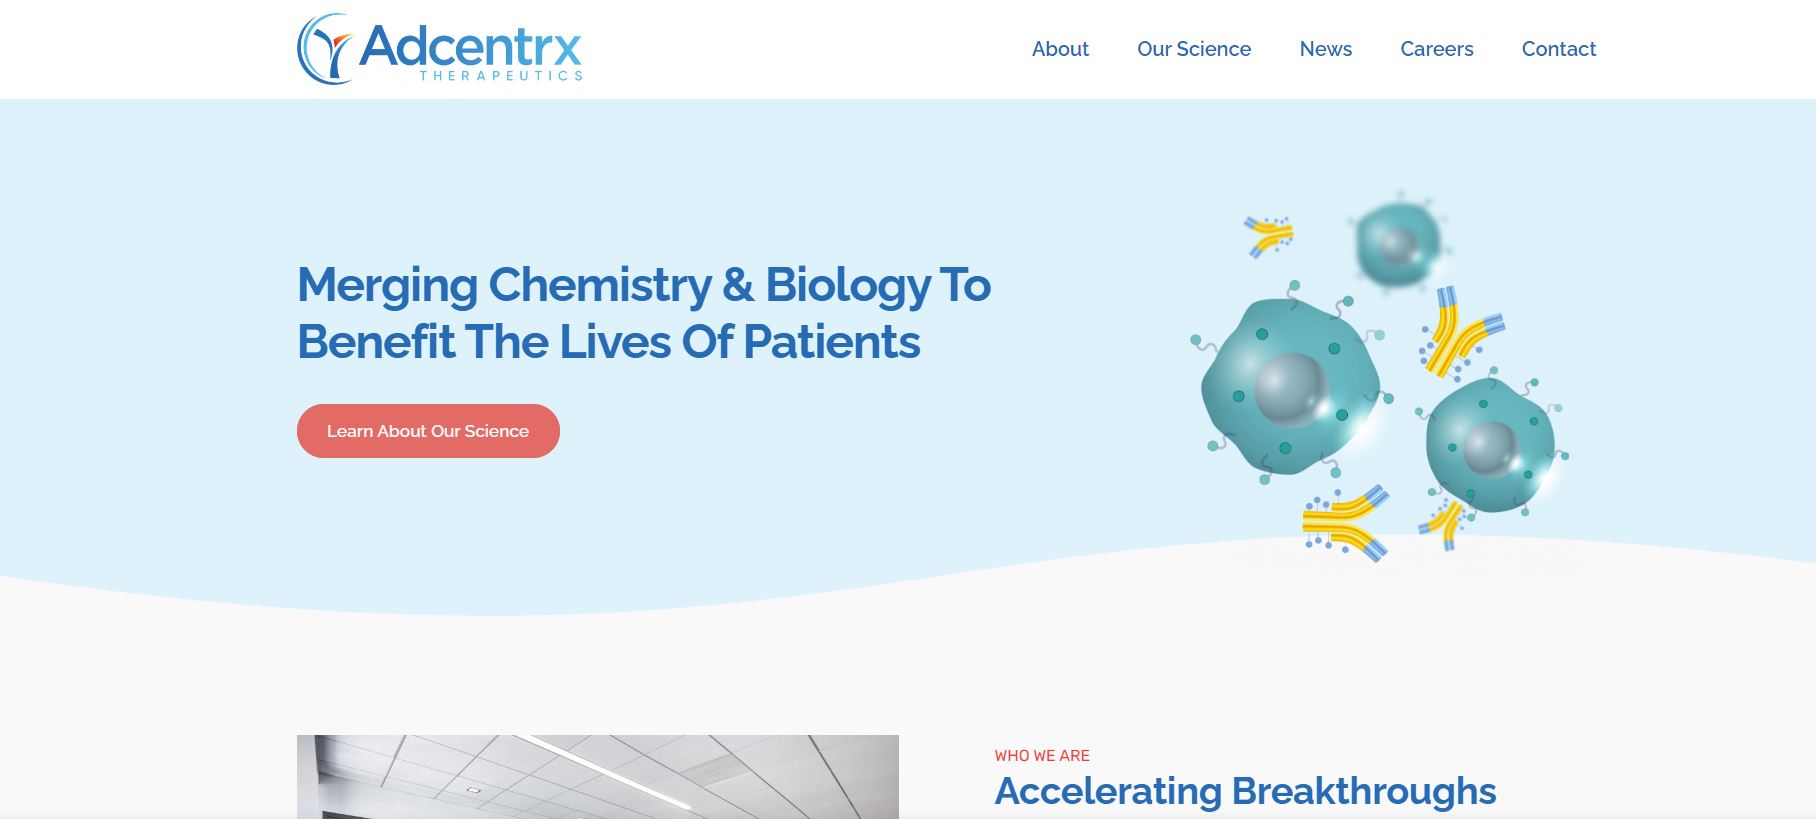 With the completion of their Series A funding round, having raised $38 million, Adcentrx has established itself as a leading company in the biotechnology research industry